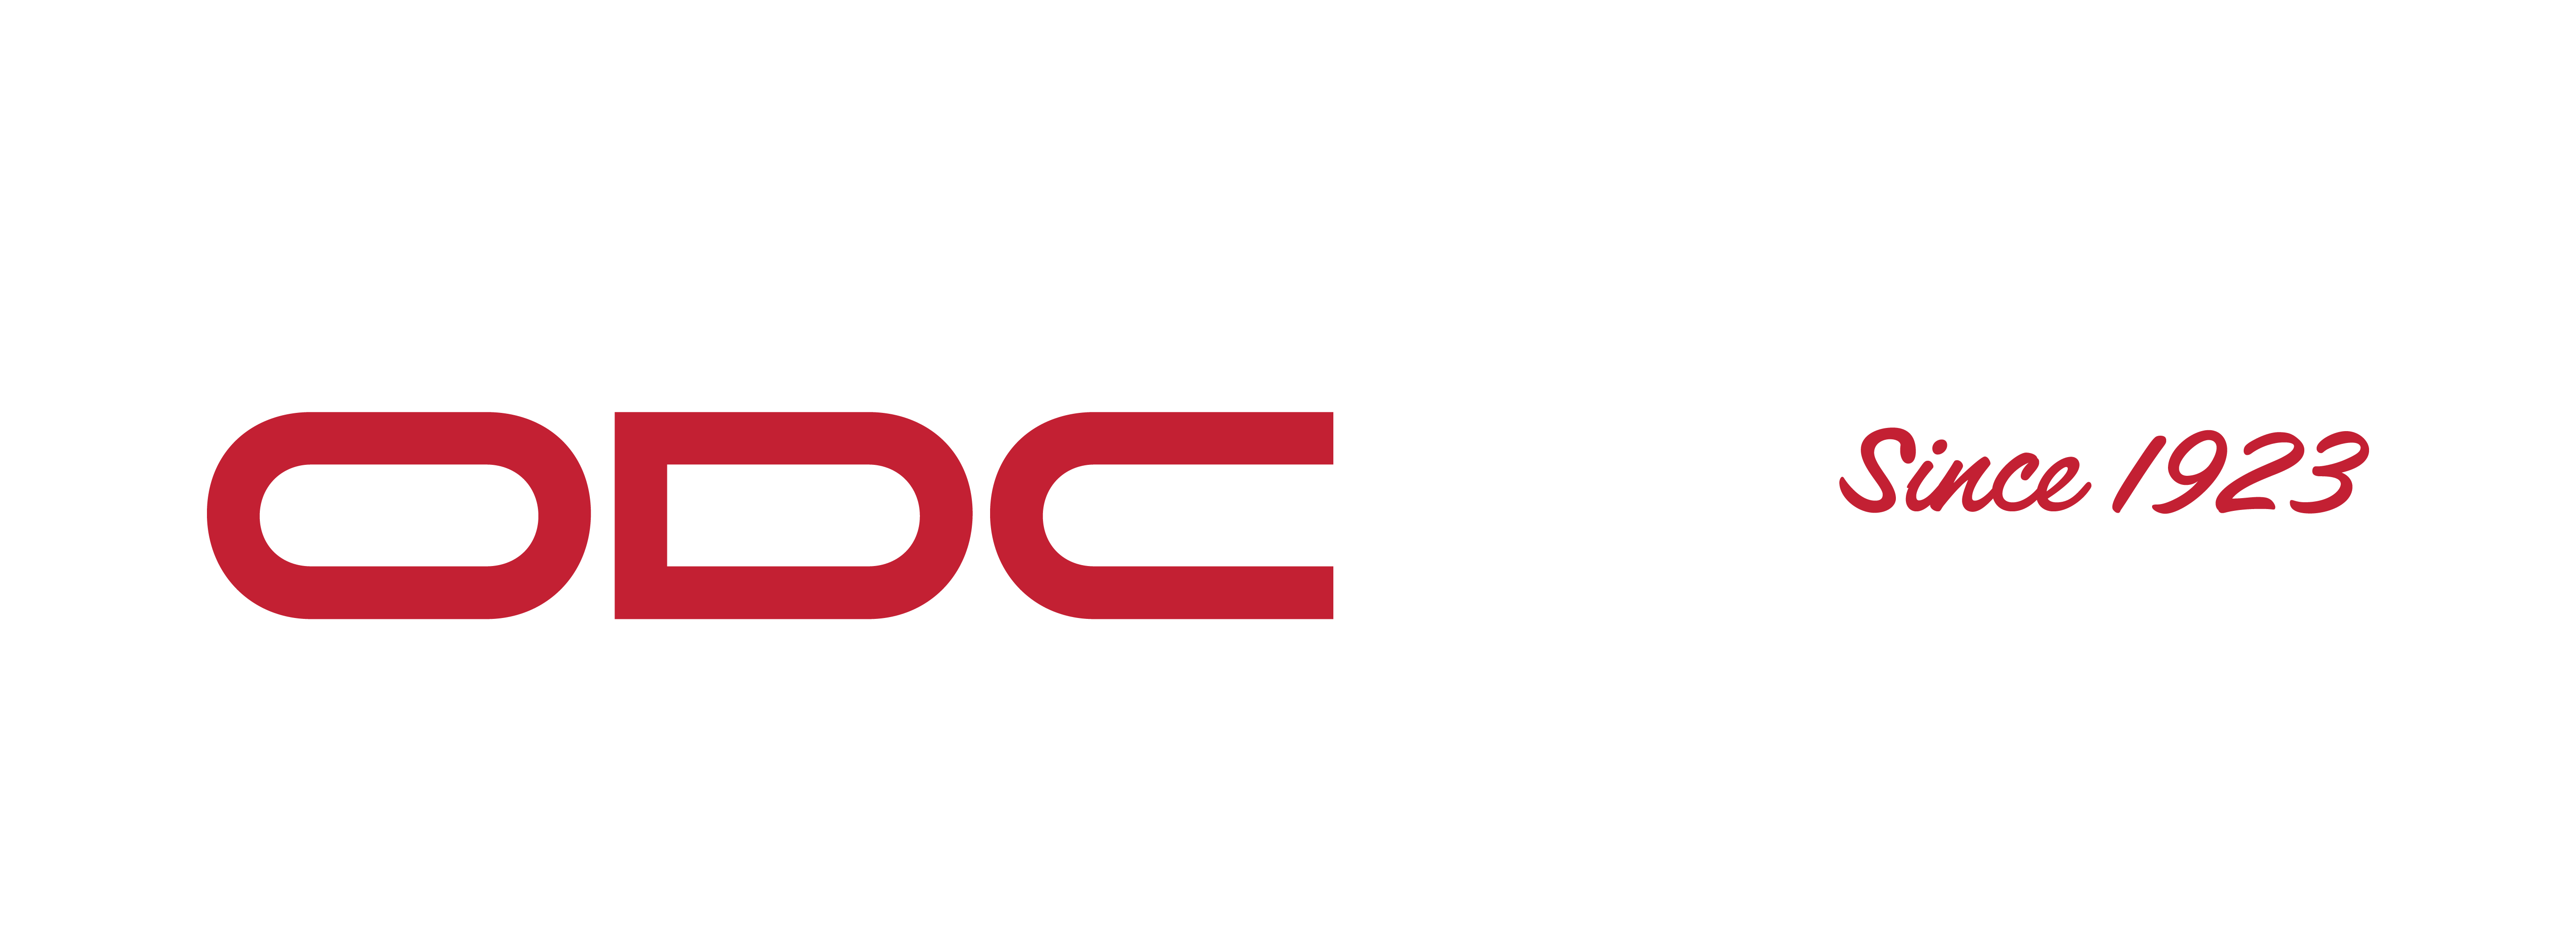 ODC Tooling & Molds